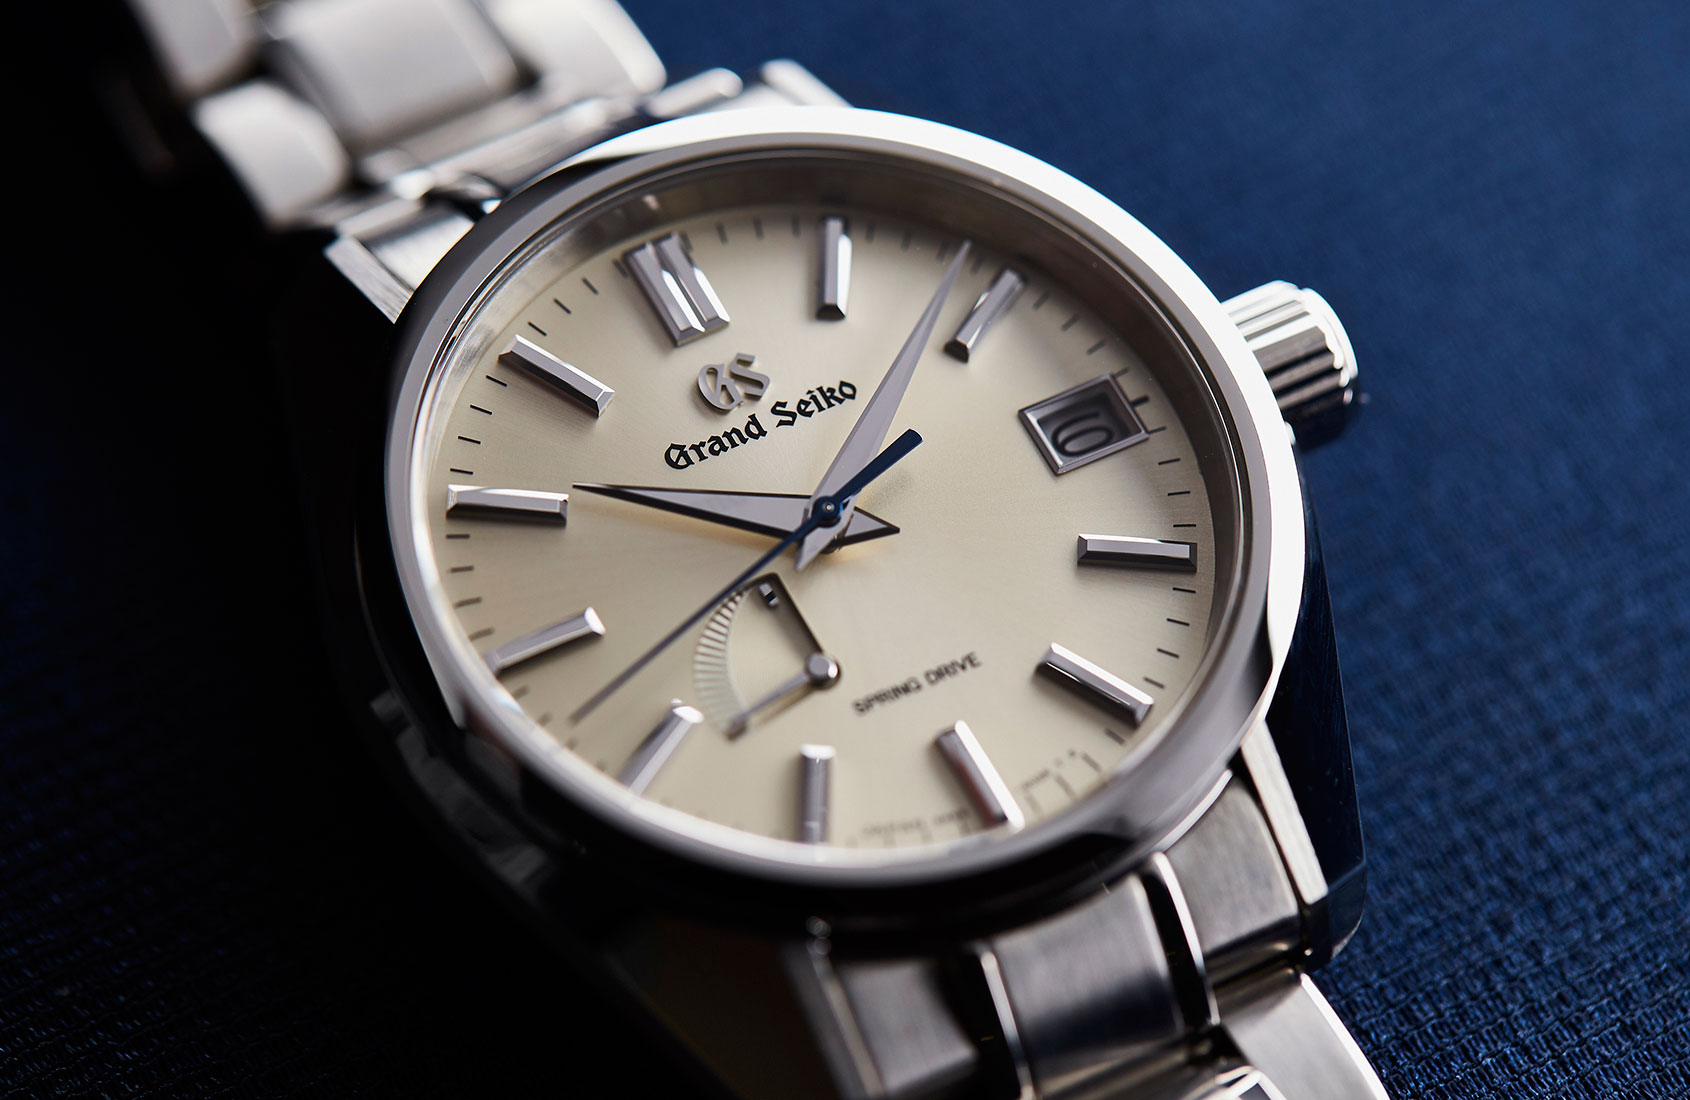 Six Things You May Not Have Known About Grand Seiko (Part One)